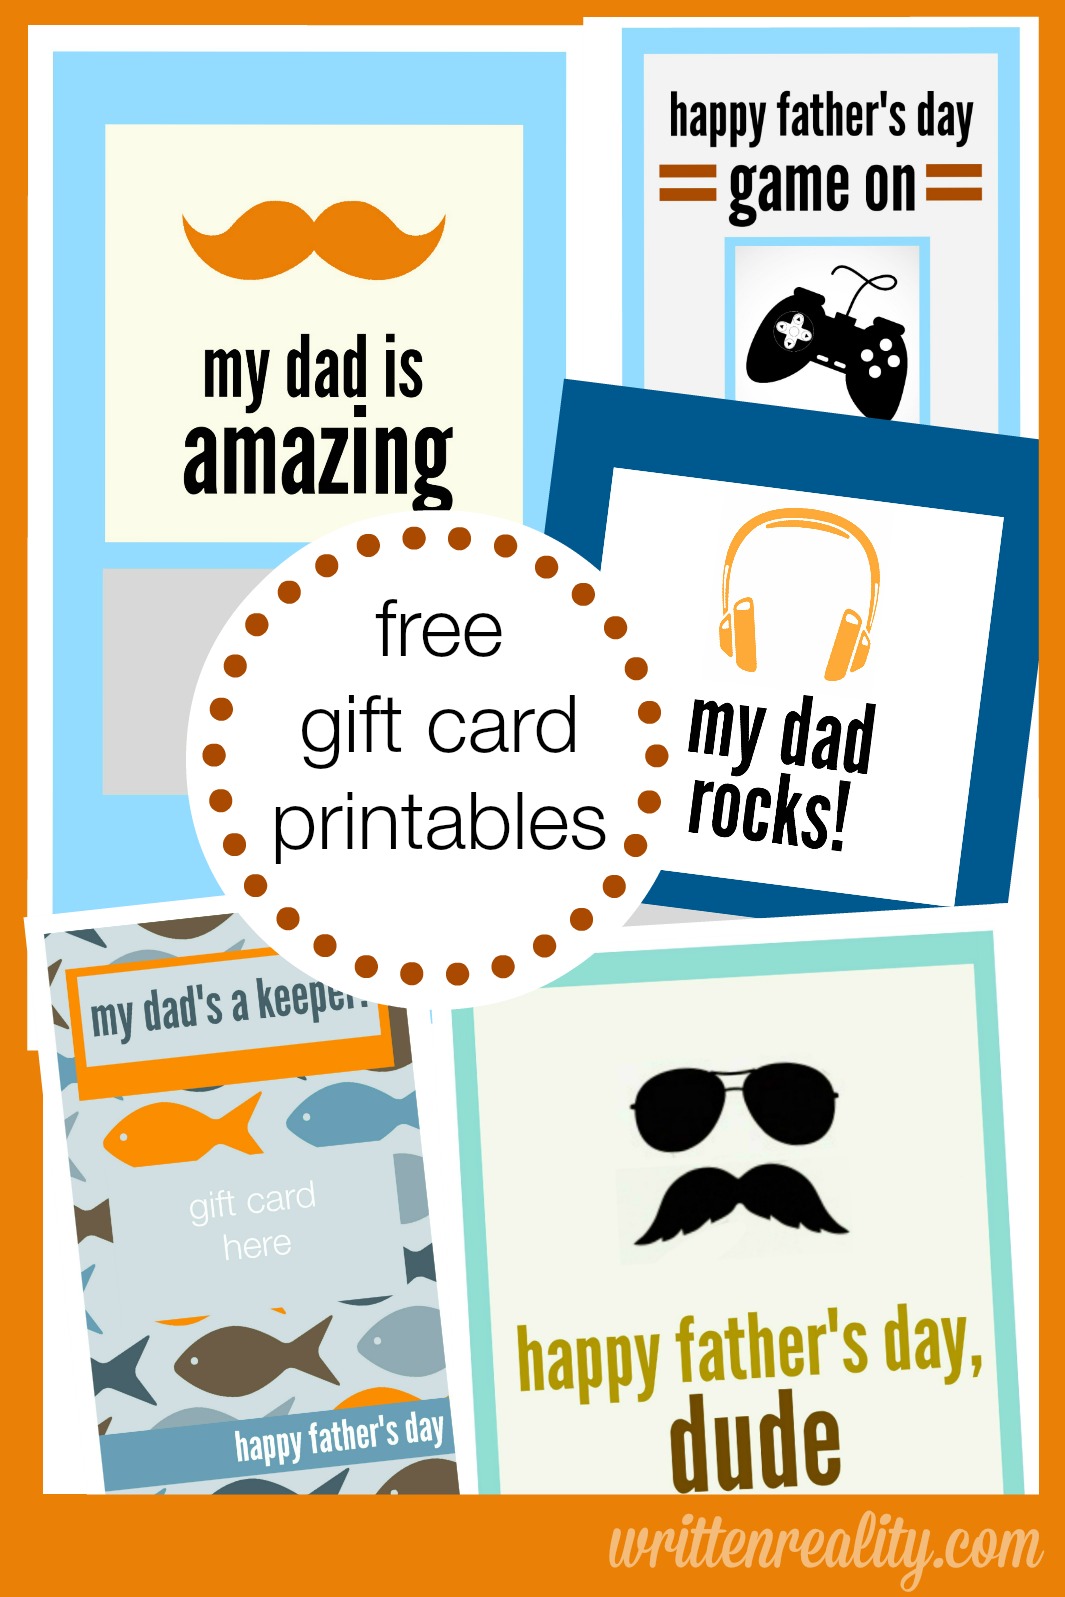 http://writtenreality.com/fathers-day-gift-card-printables/#_a5y_p=1784919